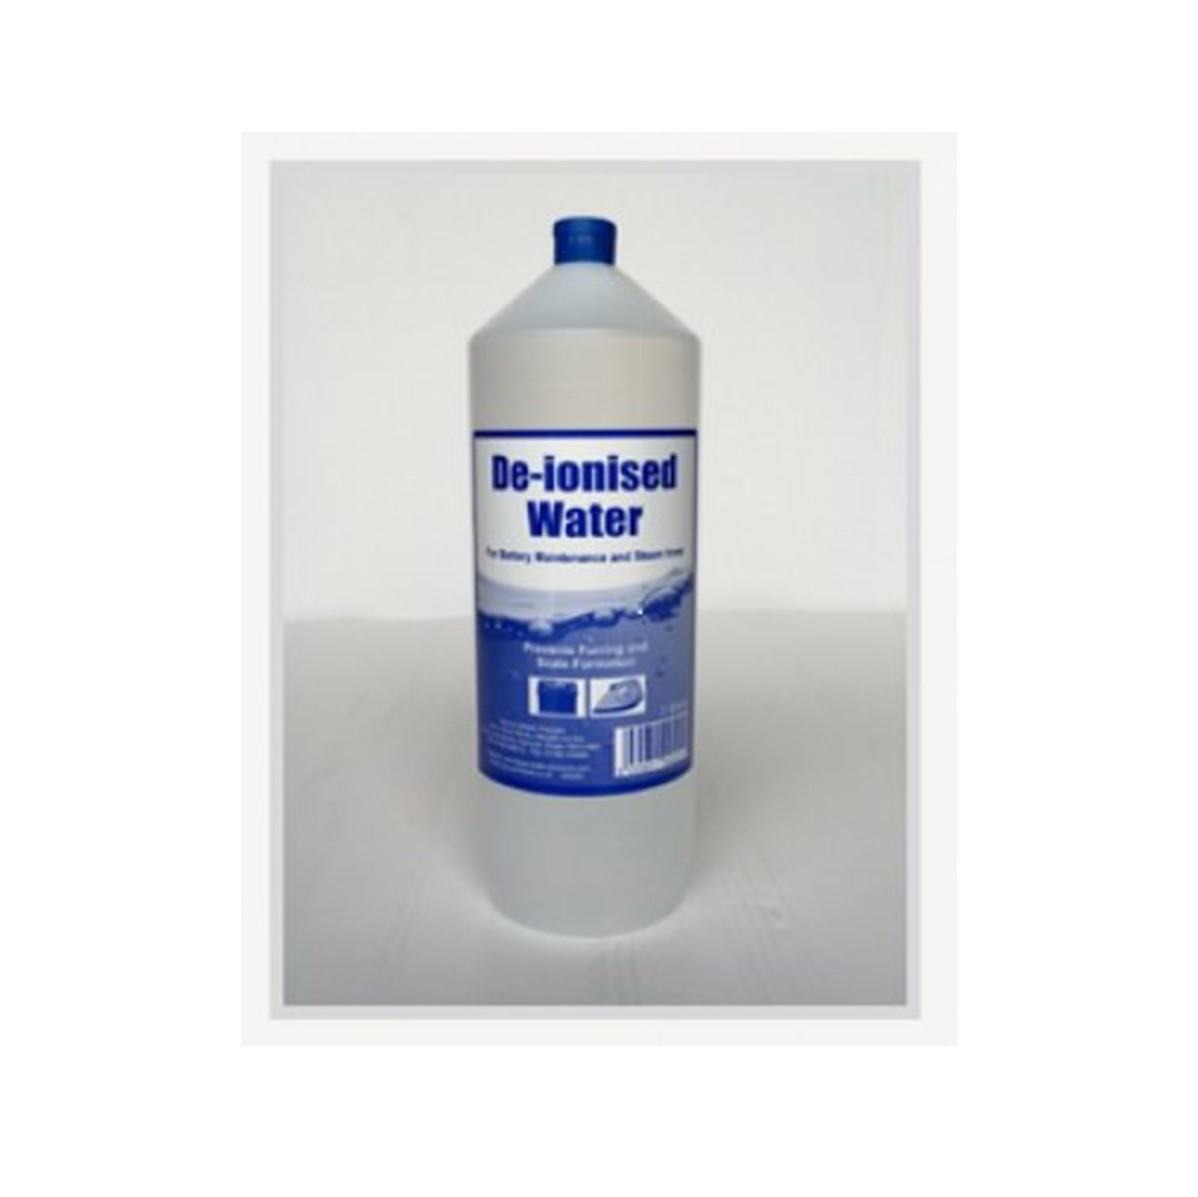 Top-Up Water Products De-Ionised Water - 1L plastic bottle